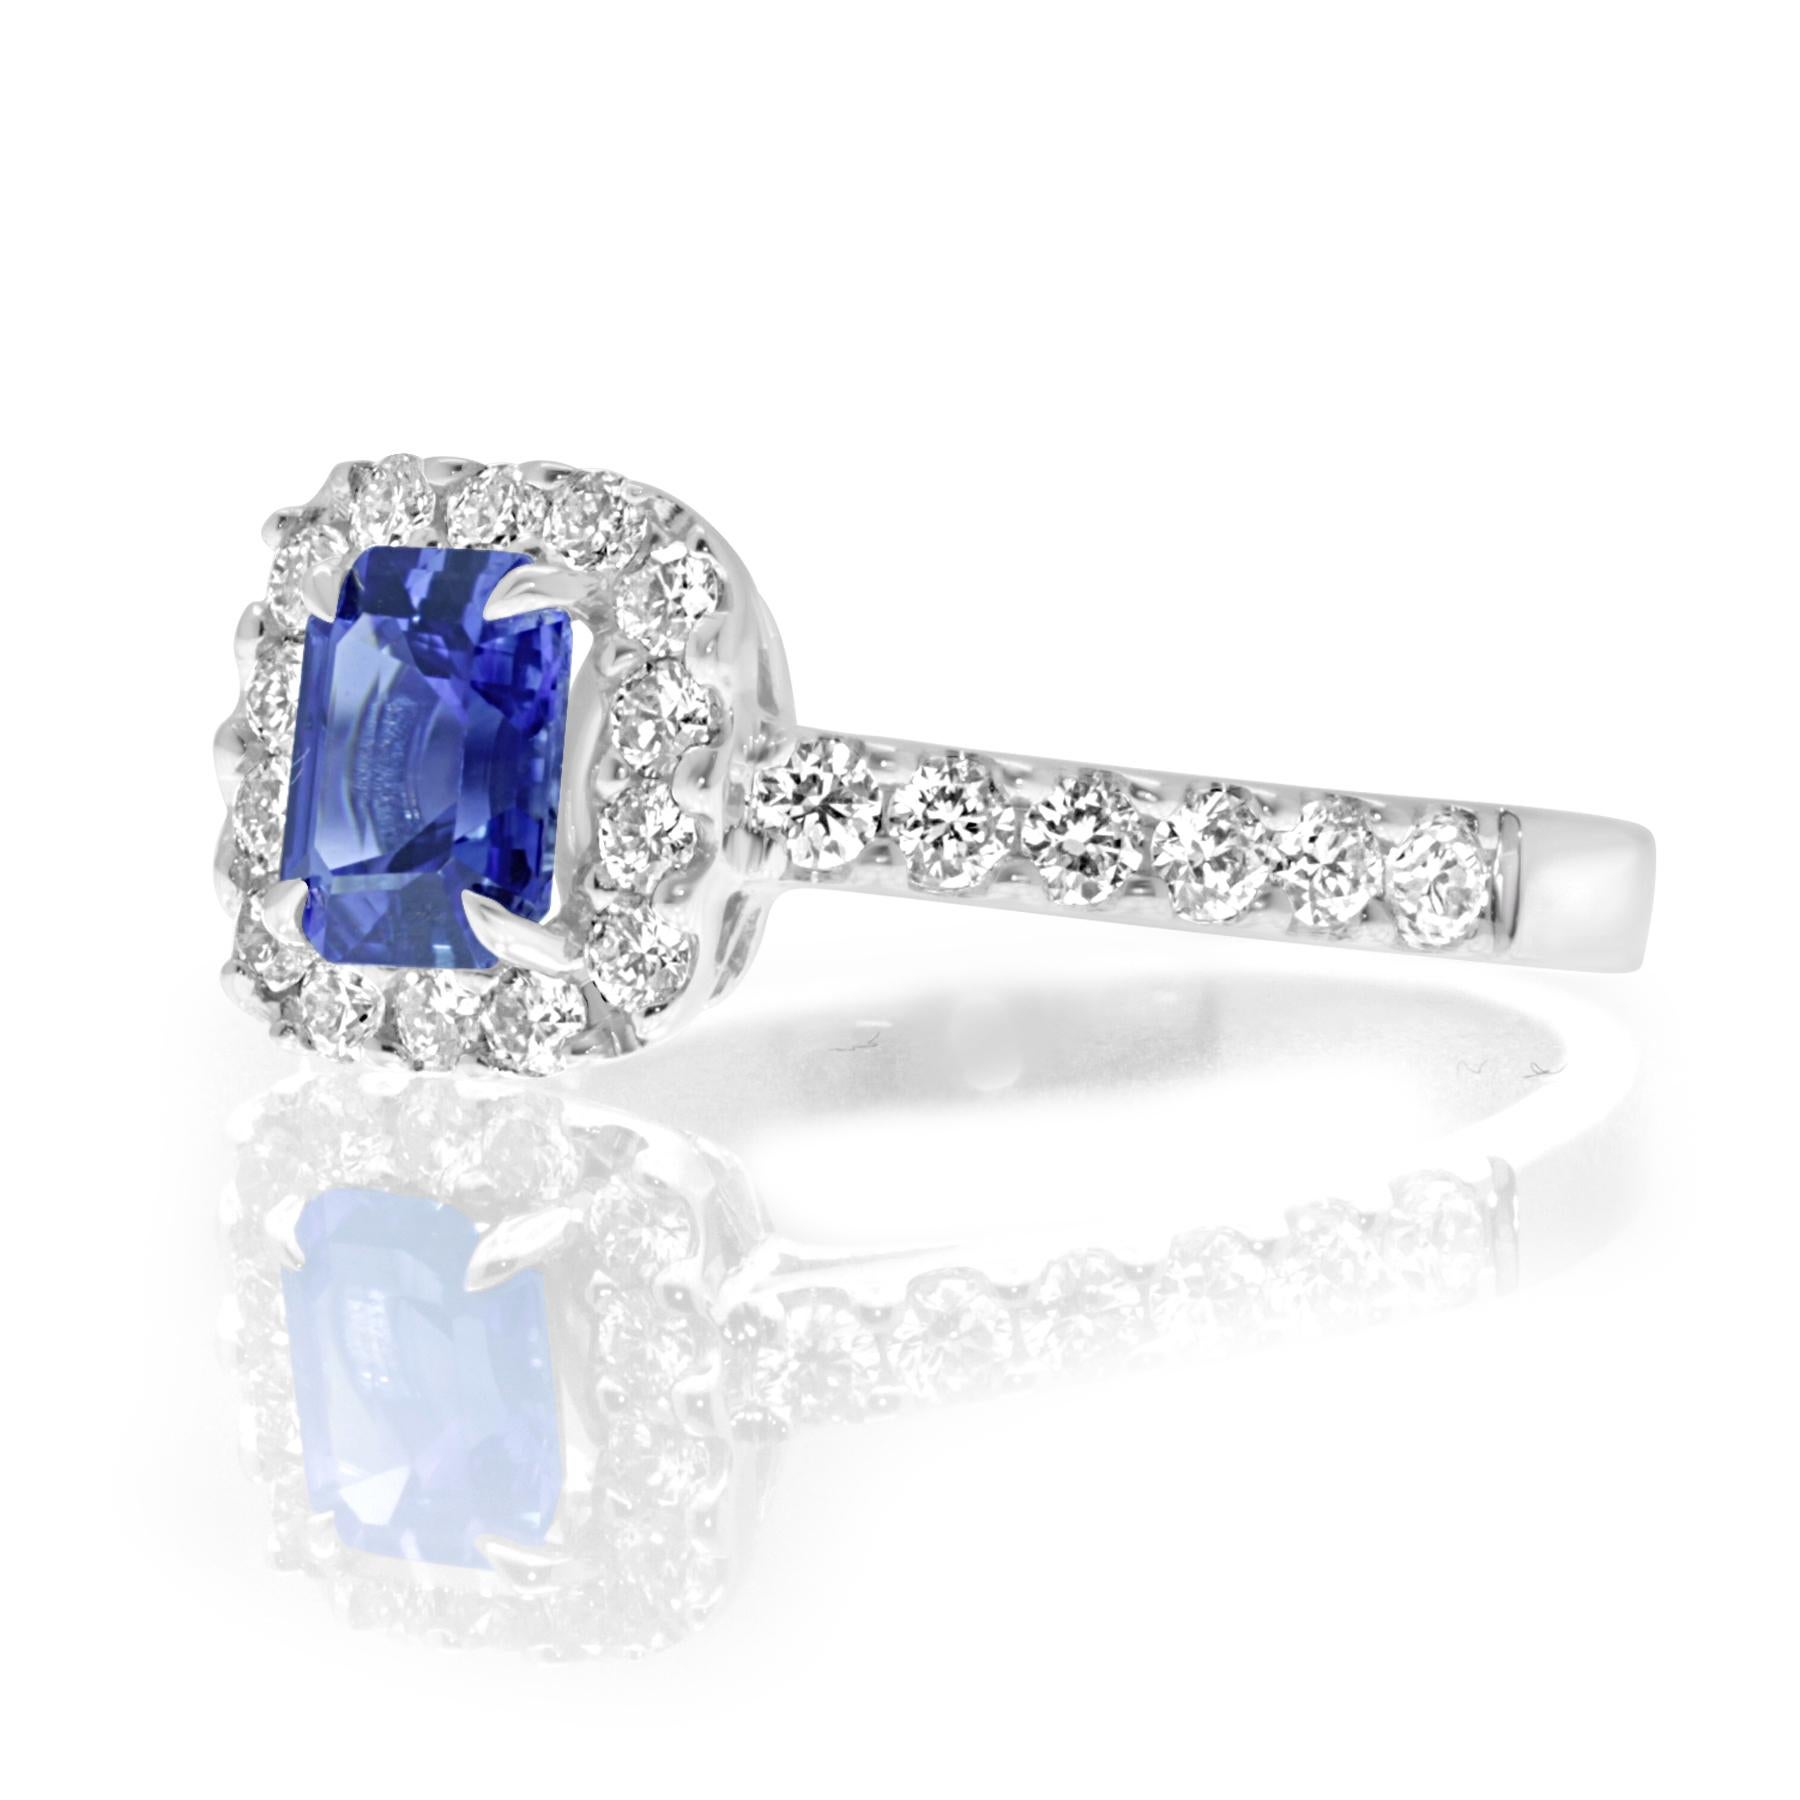 A 0.89 carat, emerald cut sapphire stone surrounded by 0.57 carat white diamonds set in 18 karat white gold.
Not every emerald cut sapphire stone has this level of clear, blue depth in it. No matter when or where you will wear it, you will shine the